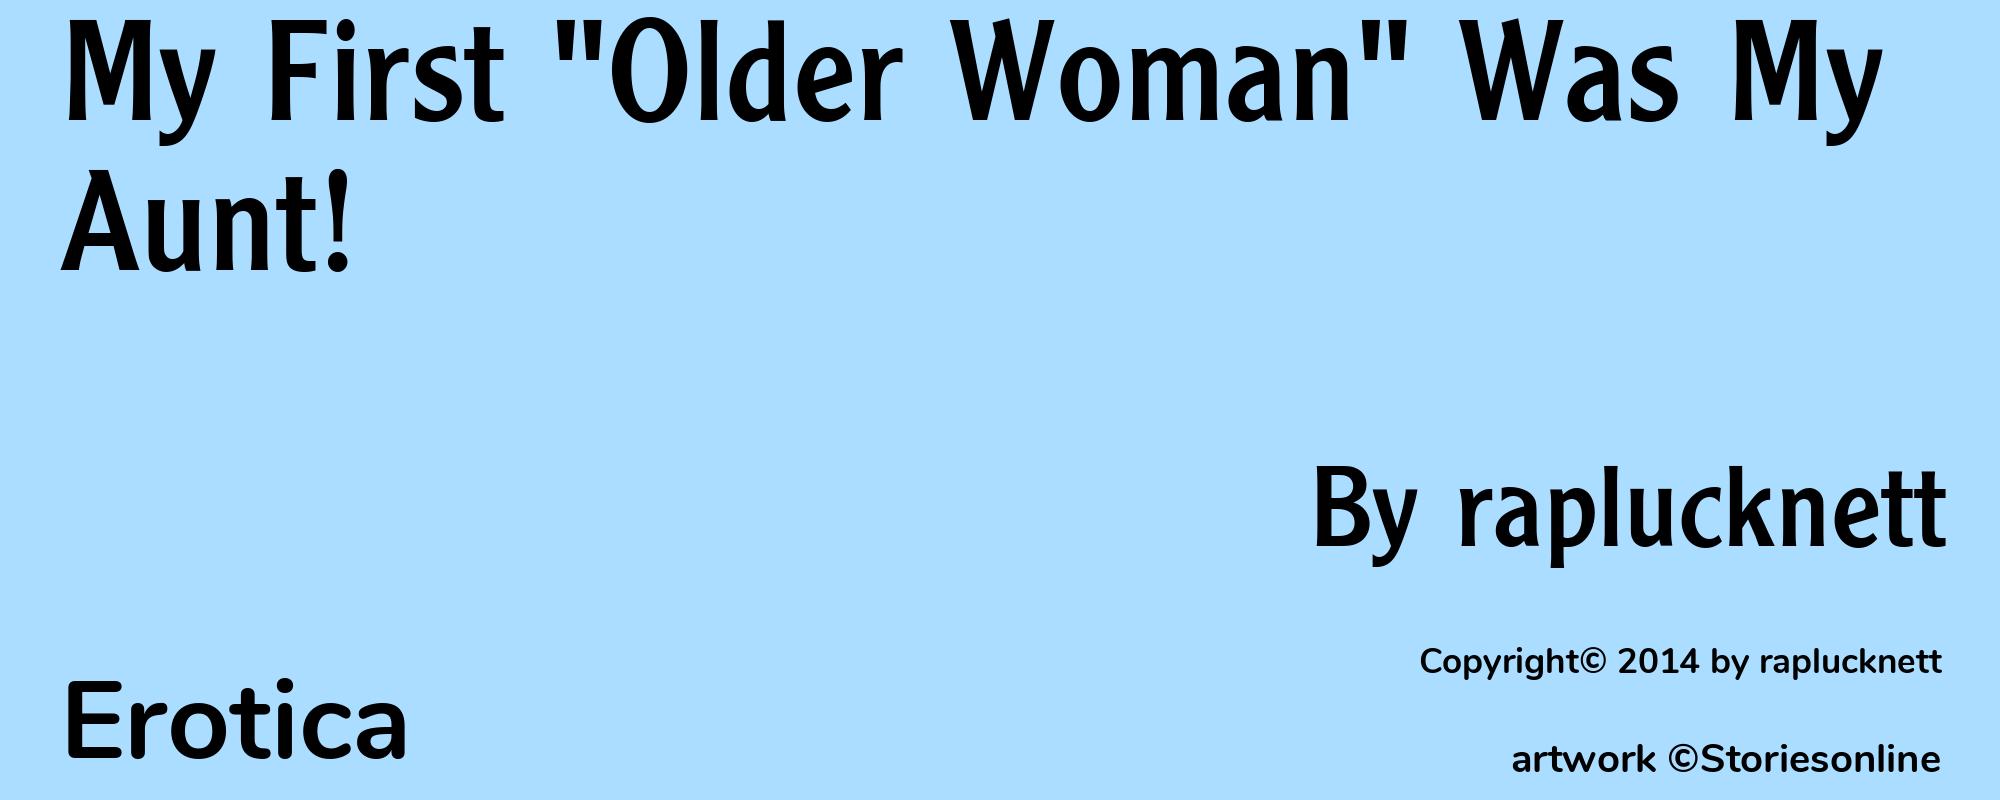 My First "Older Woman" Was My Aunt! - Cover